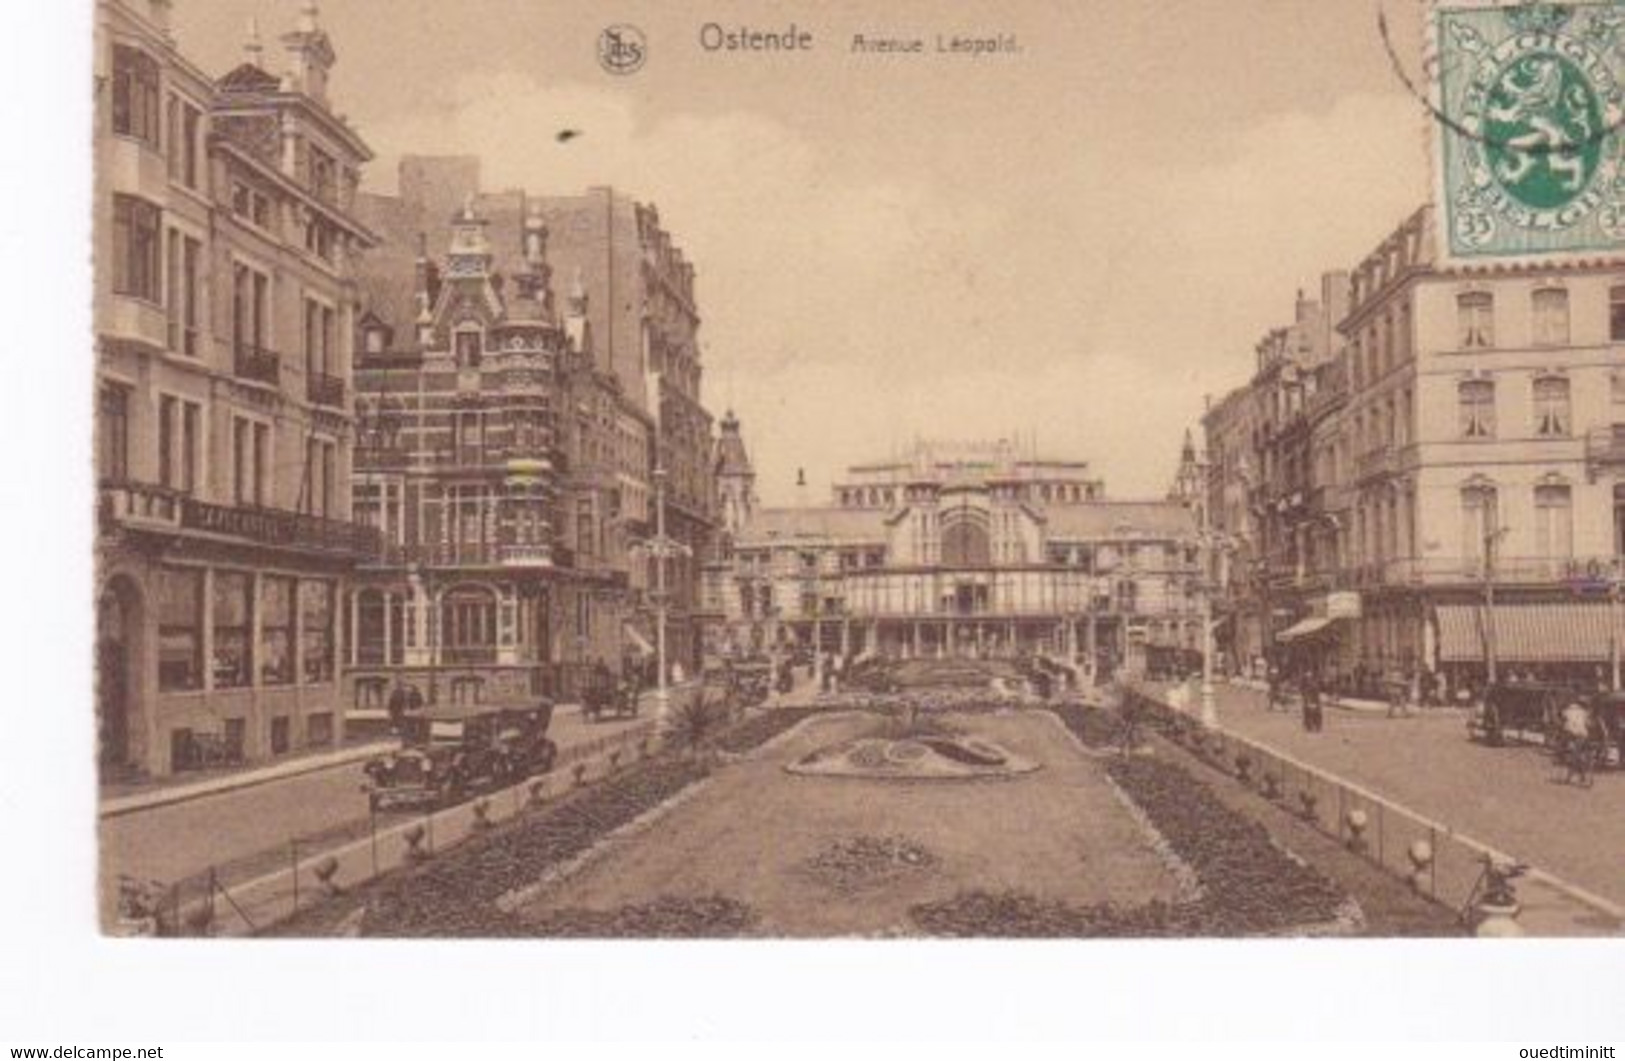 Ostende, Avenue Leopold Ed E. Thill - Oostende